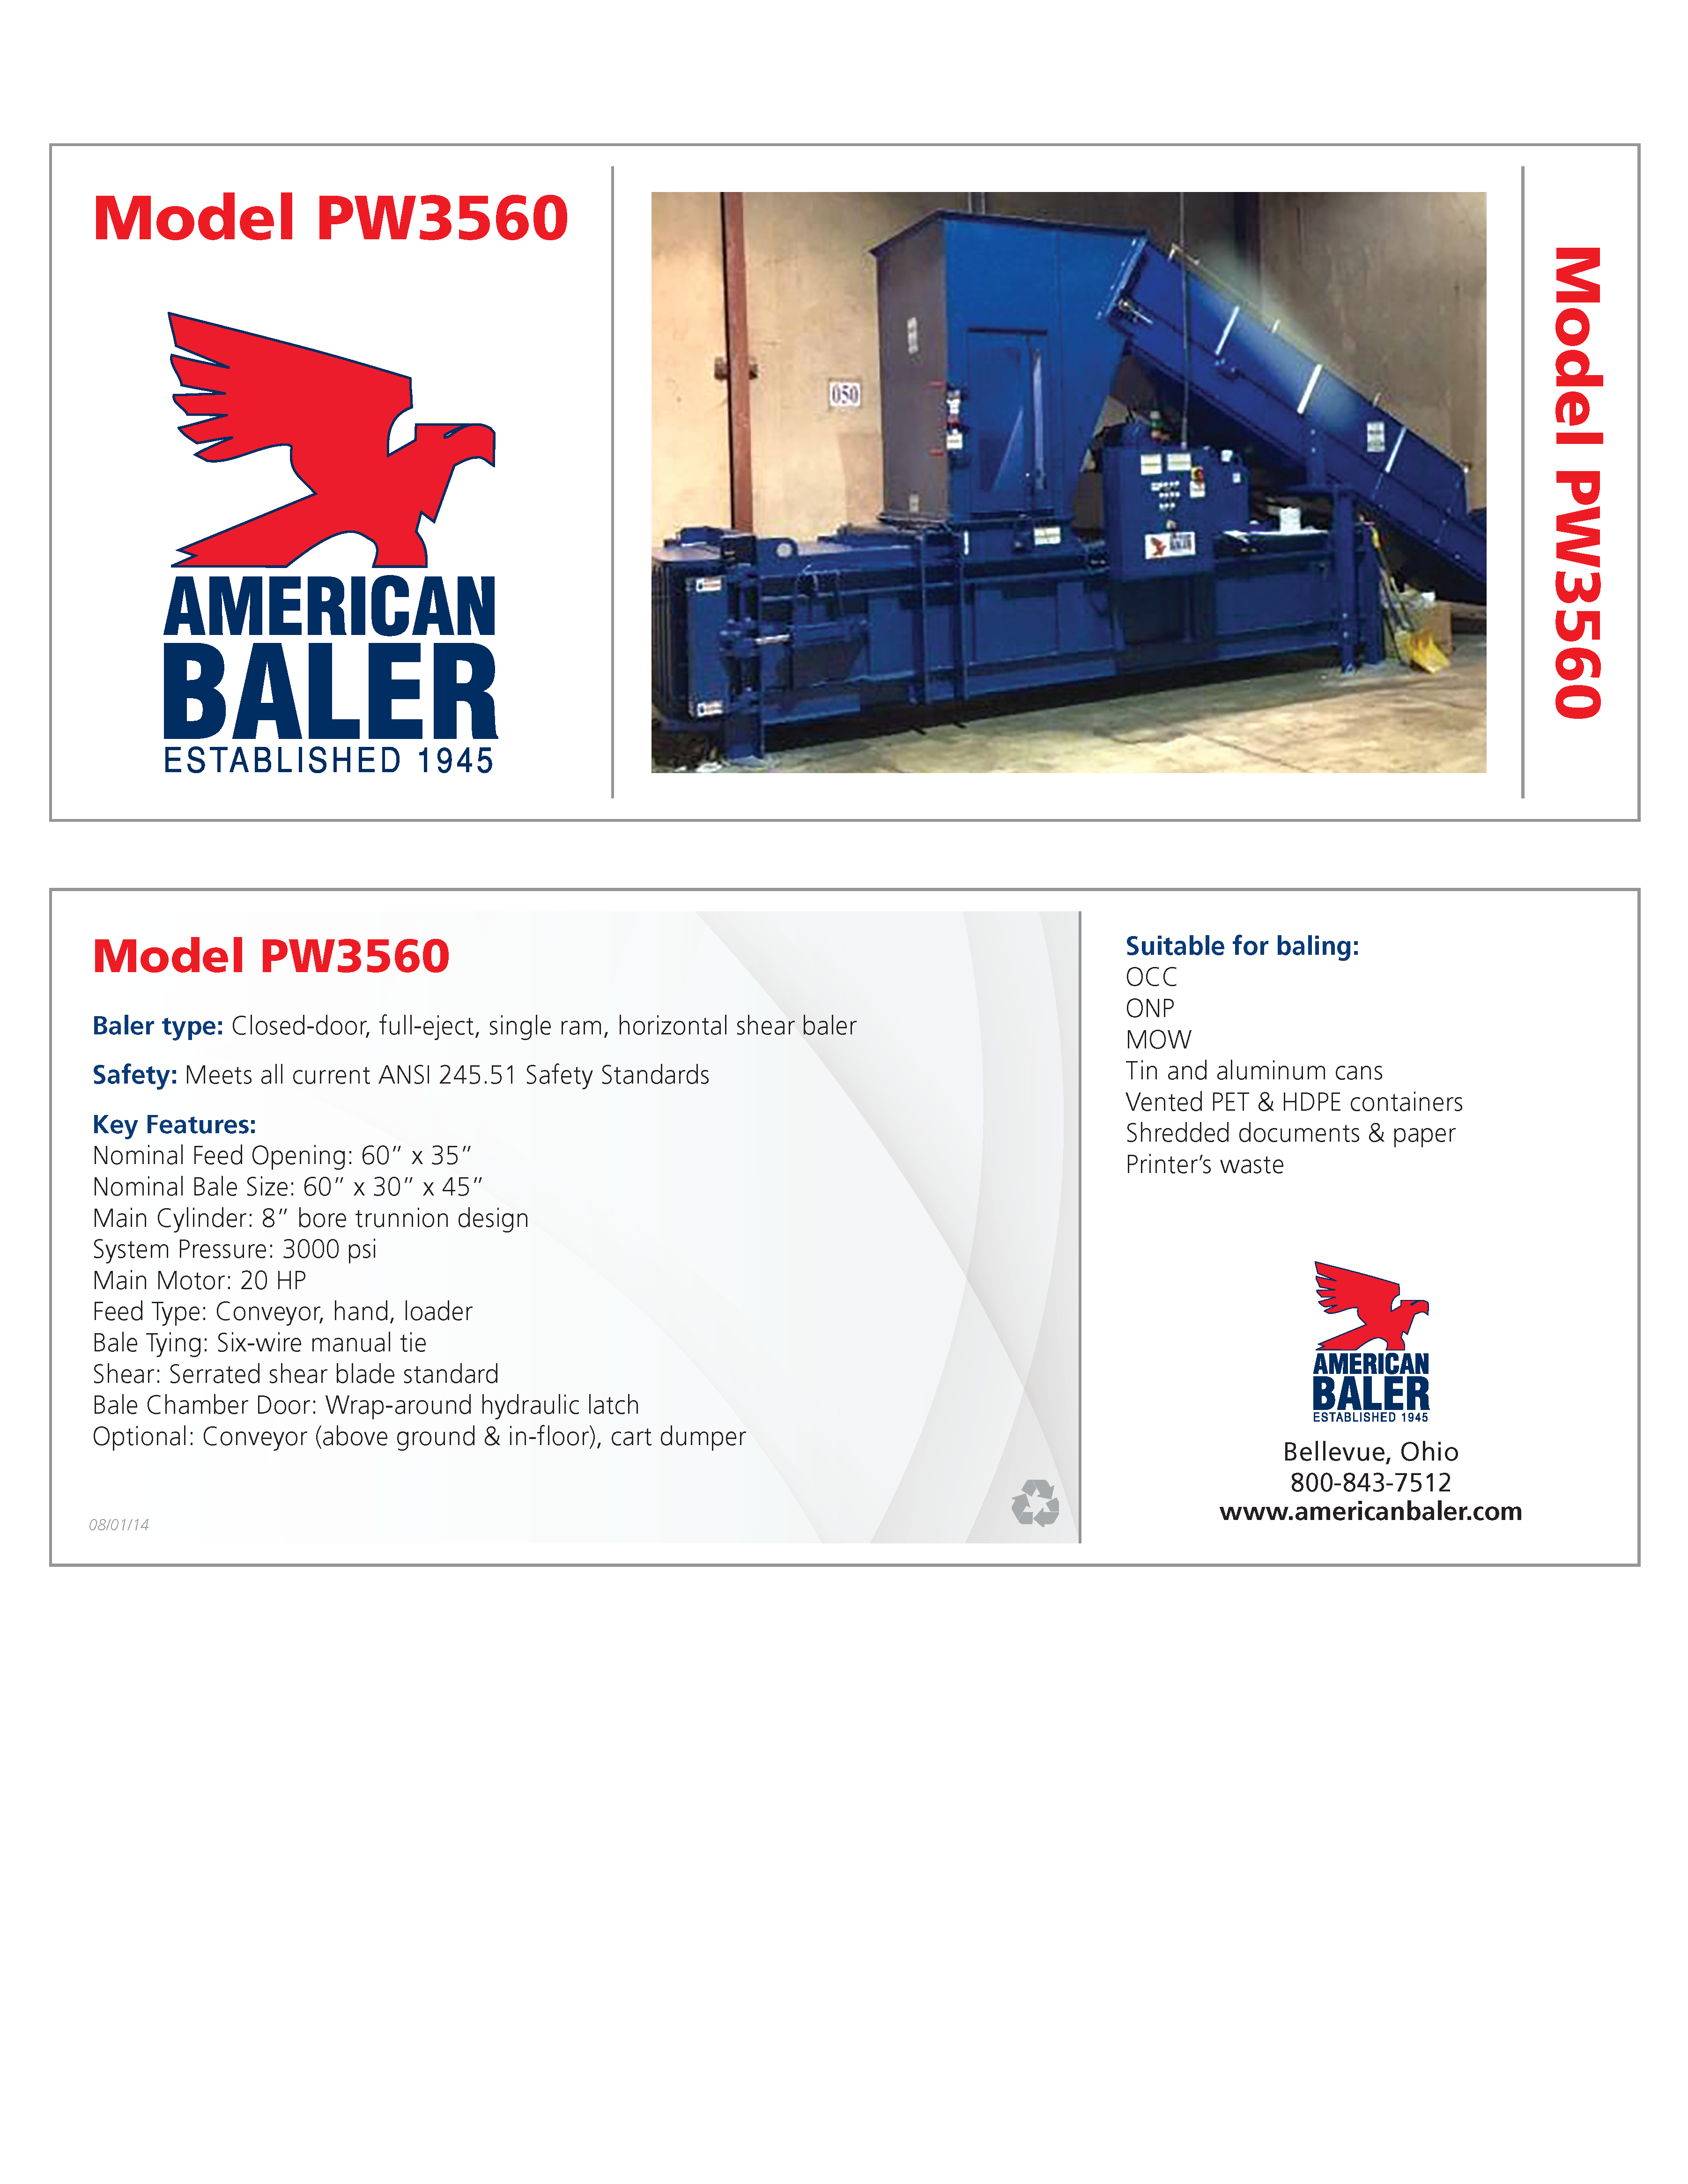 Learn more about the PW3560 Full Eject Manual-Tie Predator Baler in the American Baler Brochure. 